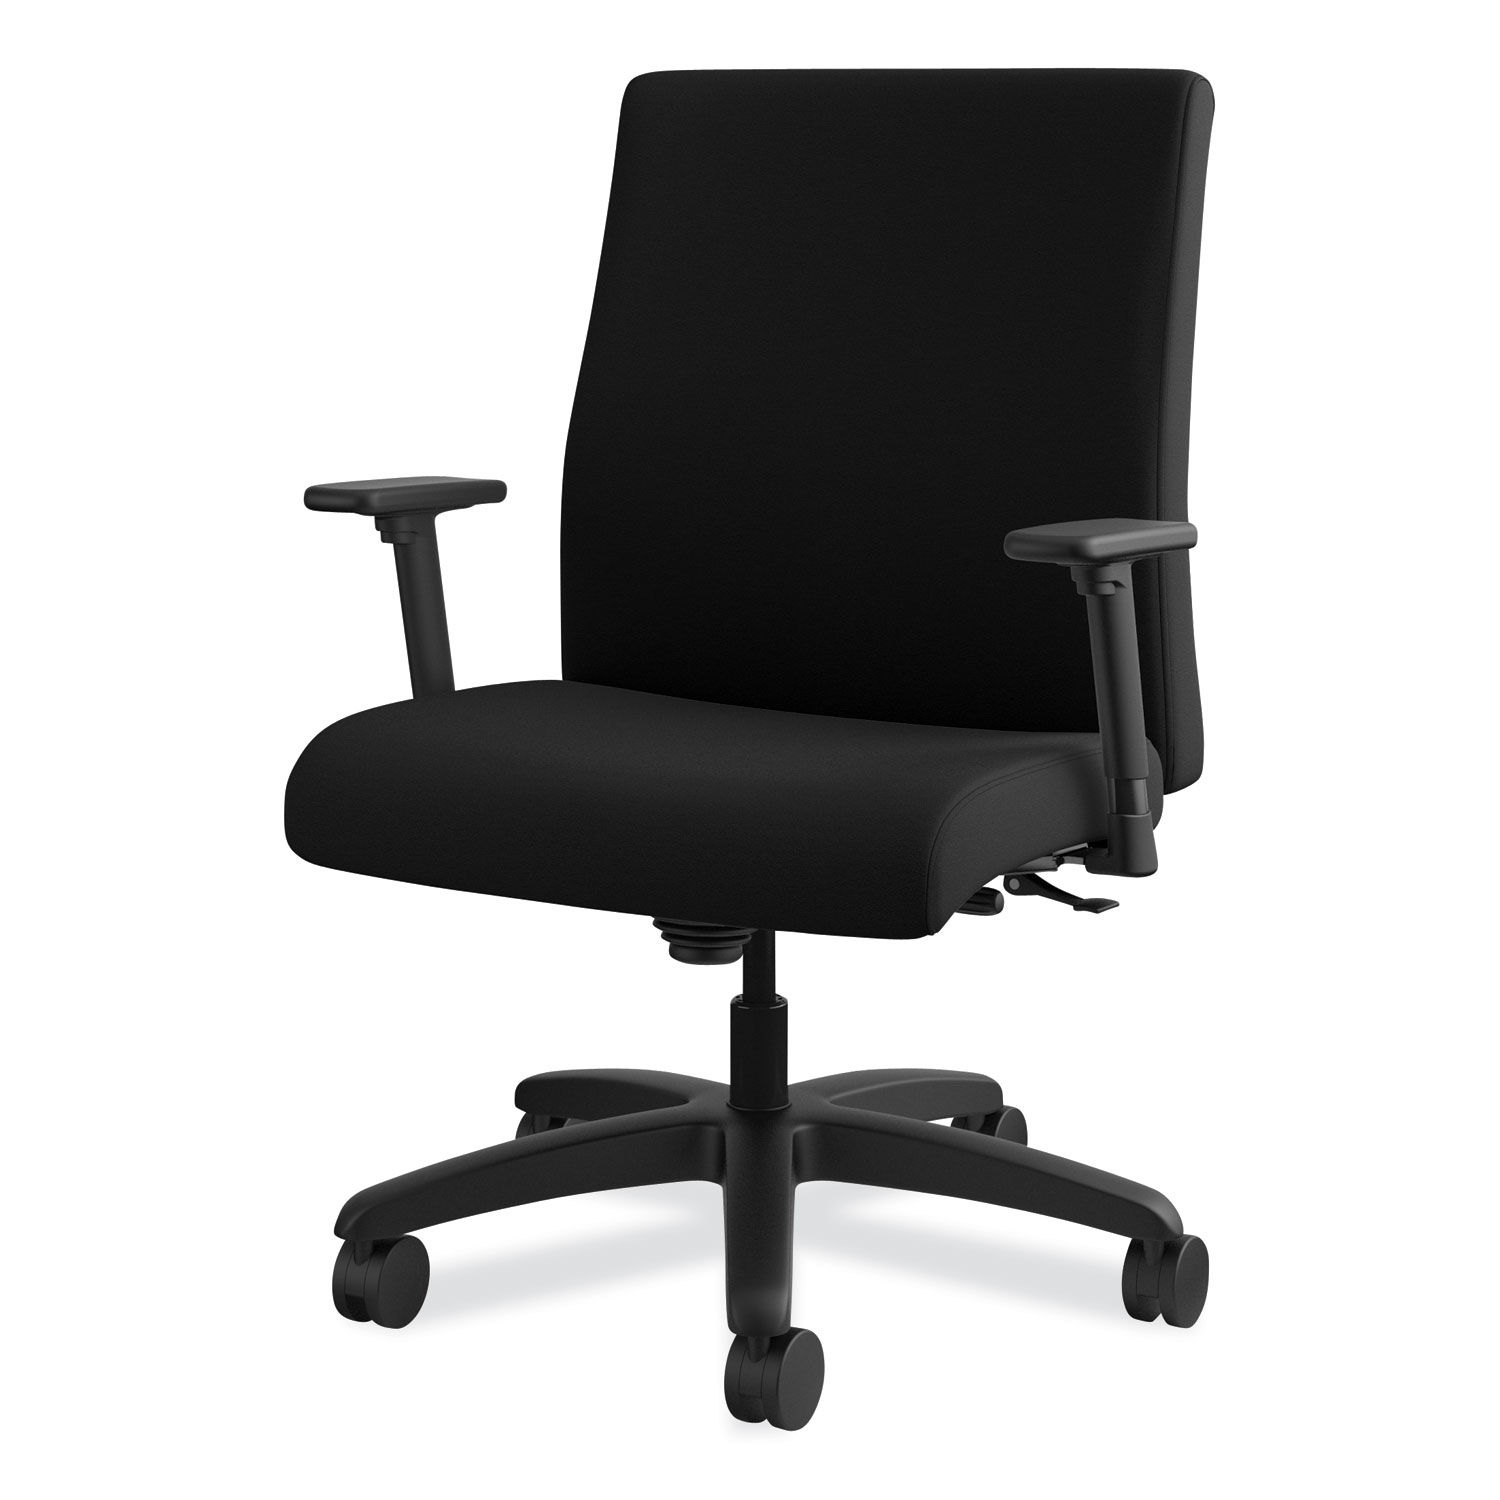 Ignition Series Big/Tall Mid-Back Work Chair Supports Up to 450 lb, 17" to 20" Seat Height, Black